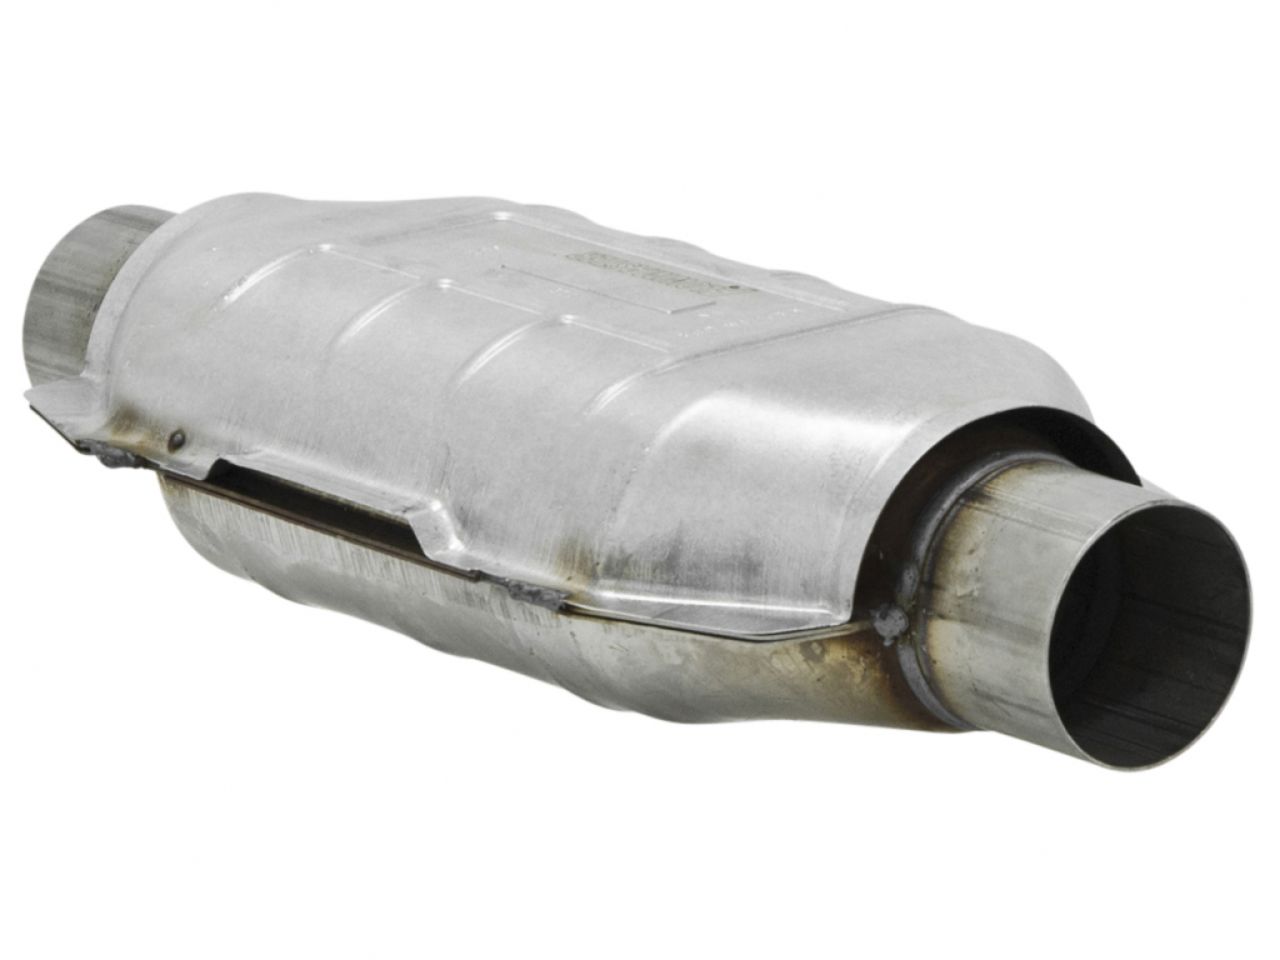 Flowmaster Catalytic Converter, Universal-Fit, 240 Series, Heavy Duty, 3.00" IN /